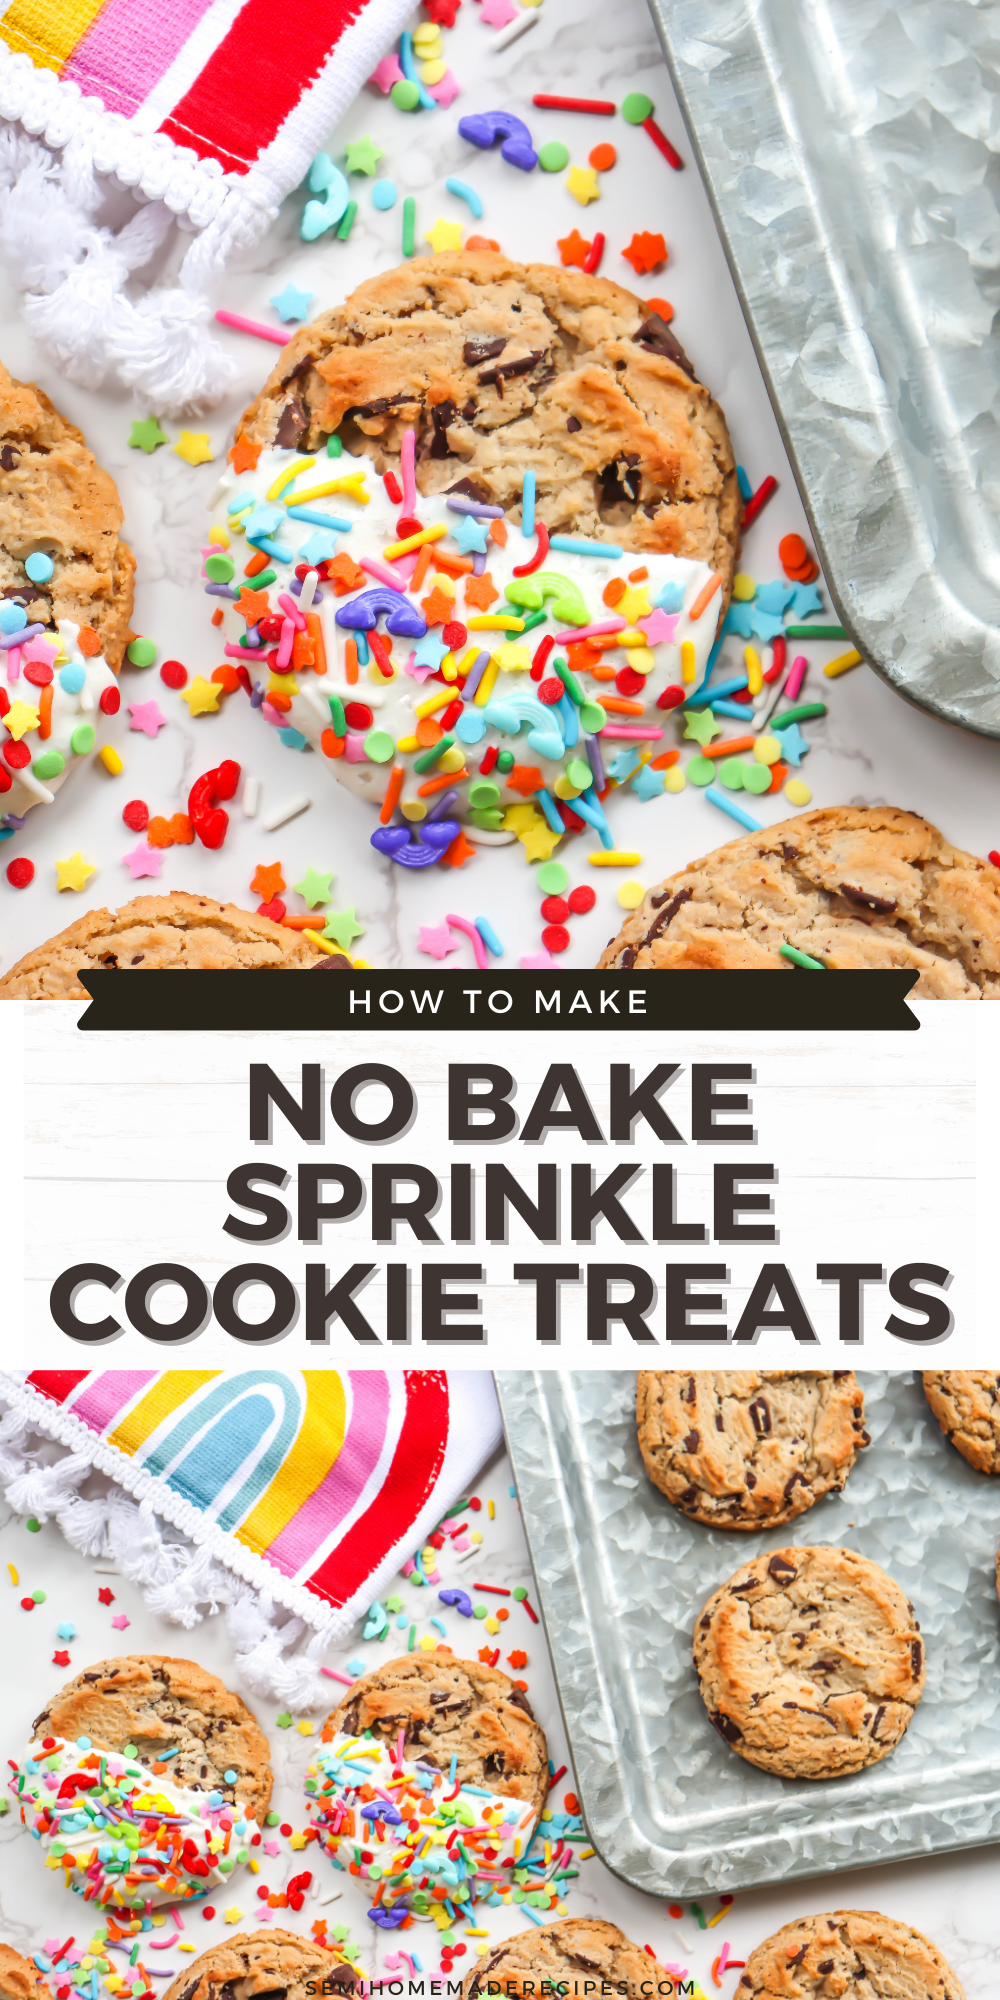 No Bake Sprinkle Cookie Treats are a great idea for birthday parties, wedding showers, baby showers and gifts! They're also ridiculously easy to make!